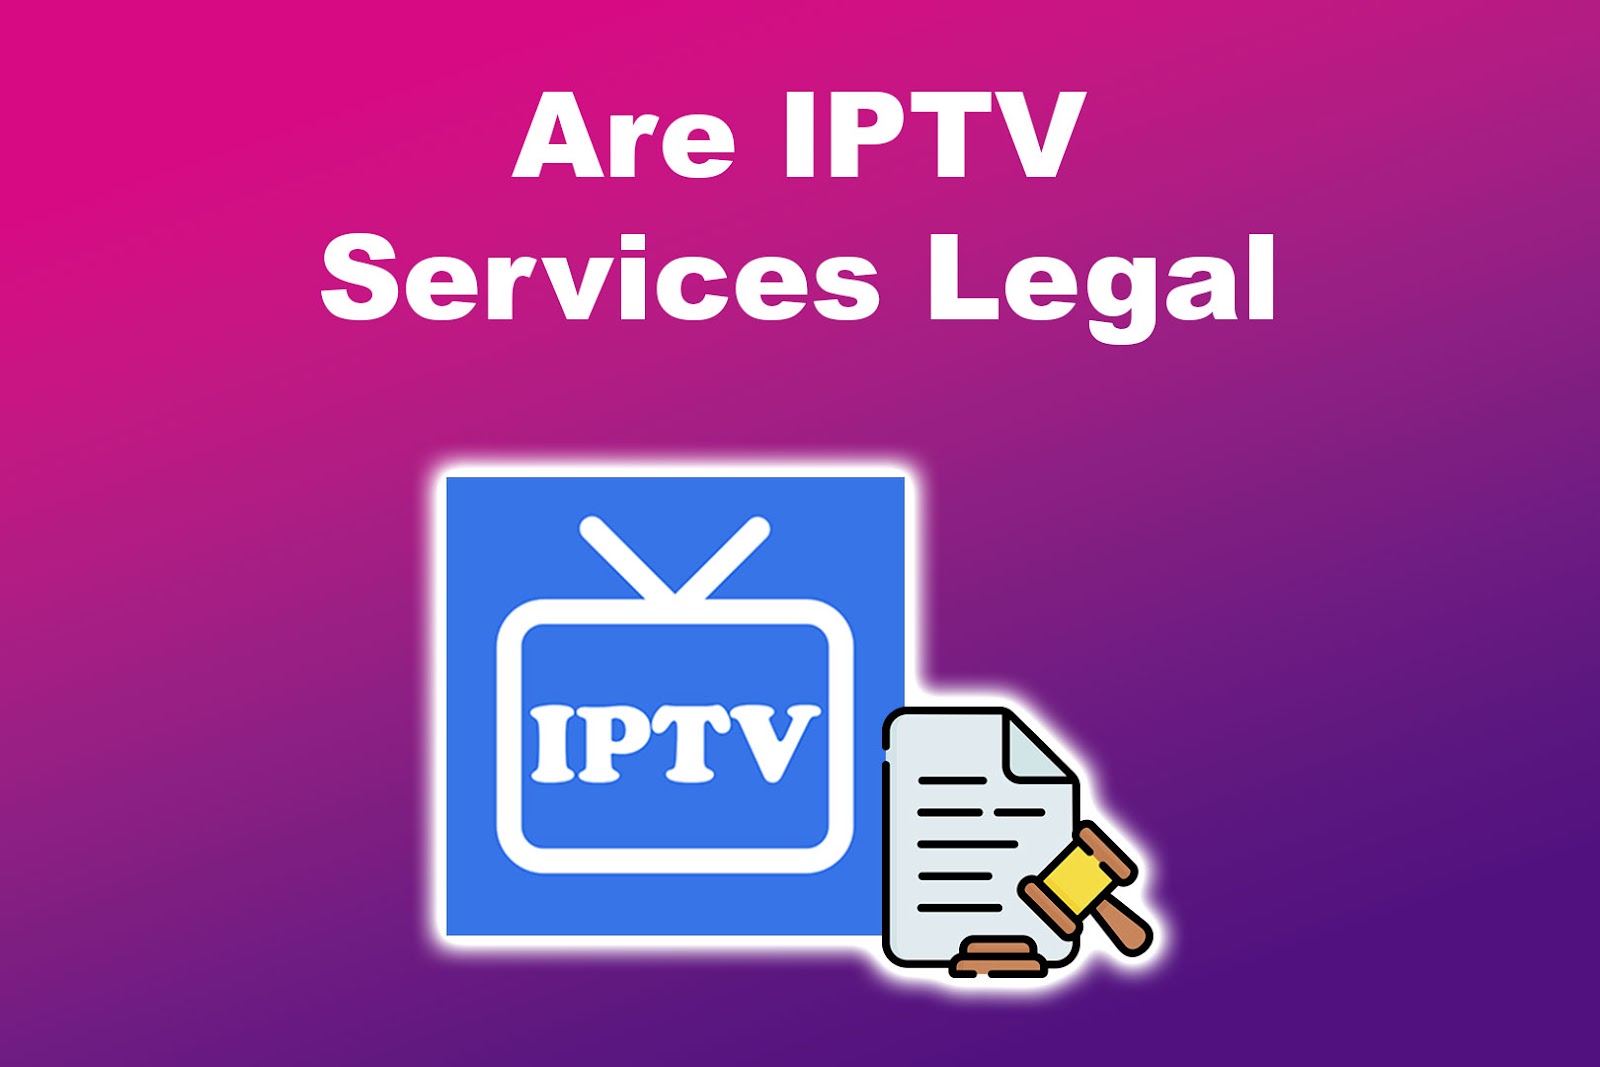 Are IPTV Services Legal